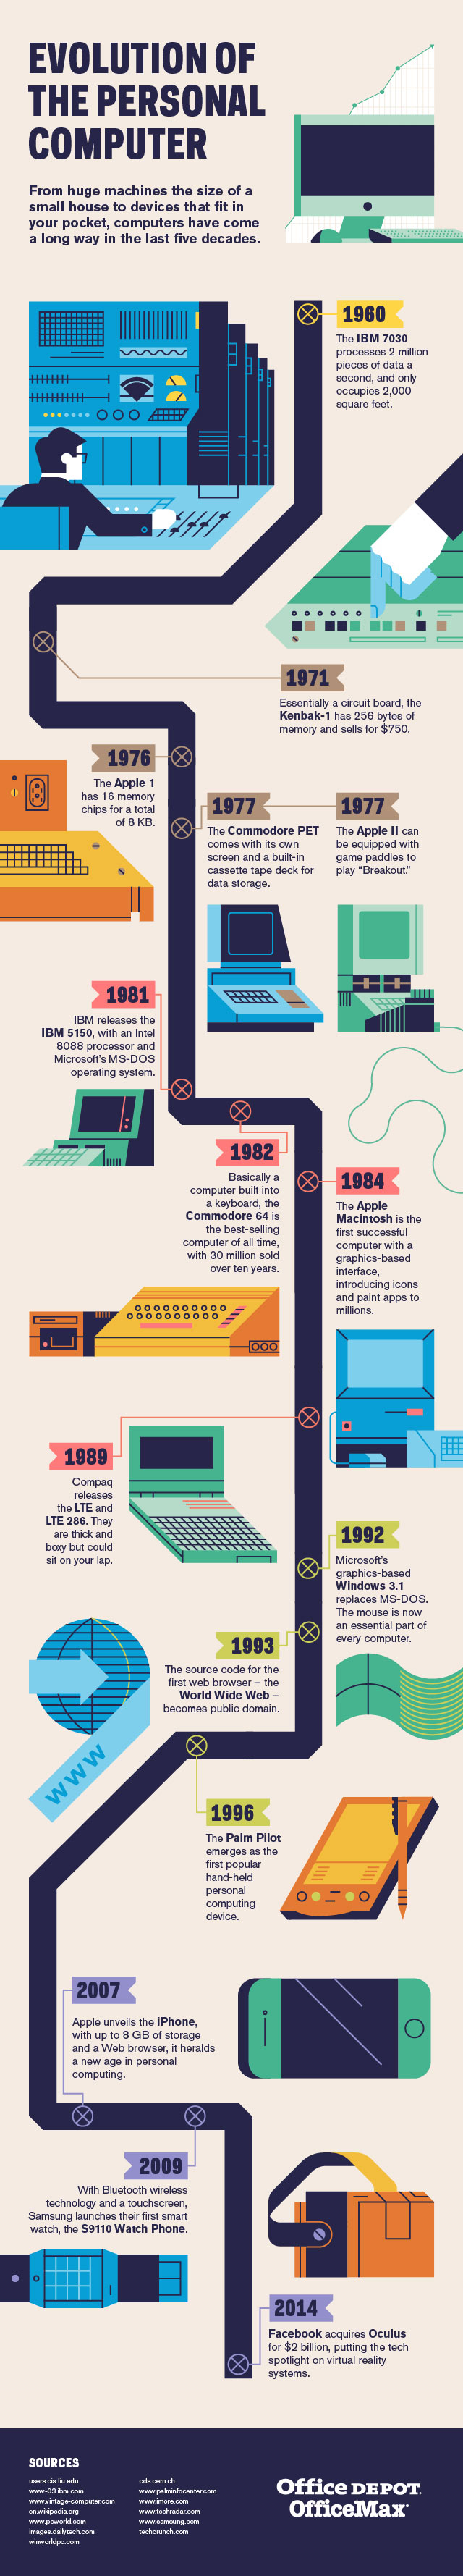 Evolution of the personal computer